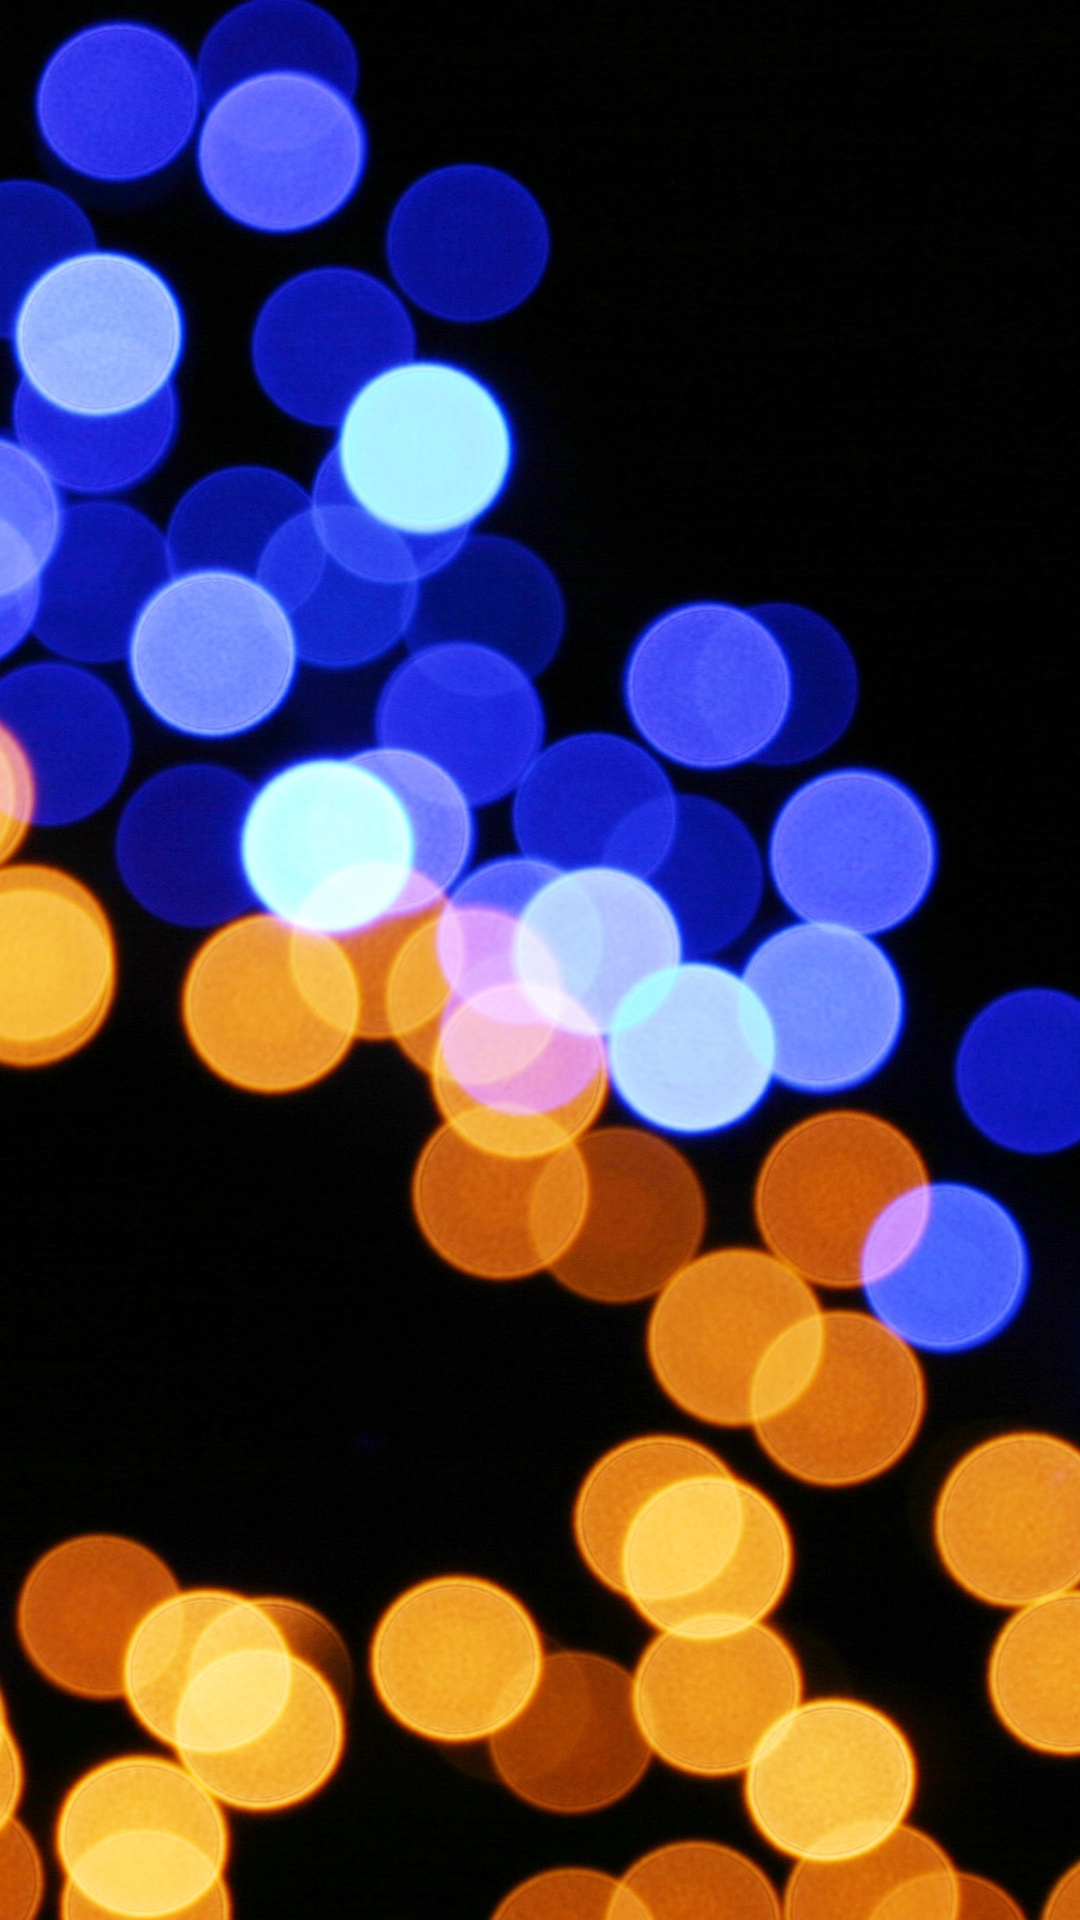 Blue and White Bokeh Lights. Wallpaper in 1080x1920 Resolution